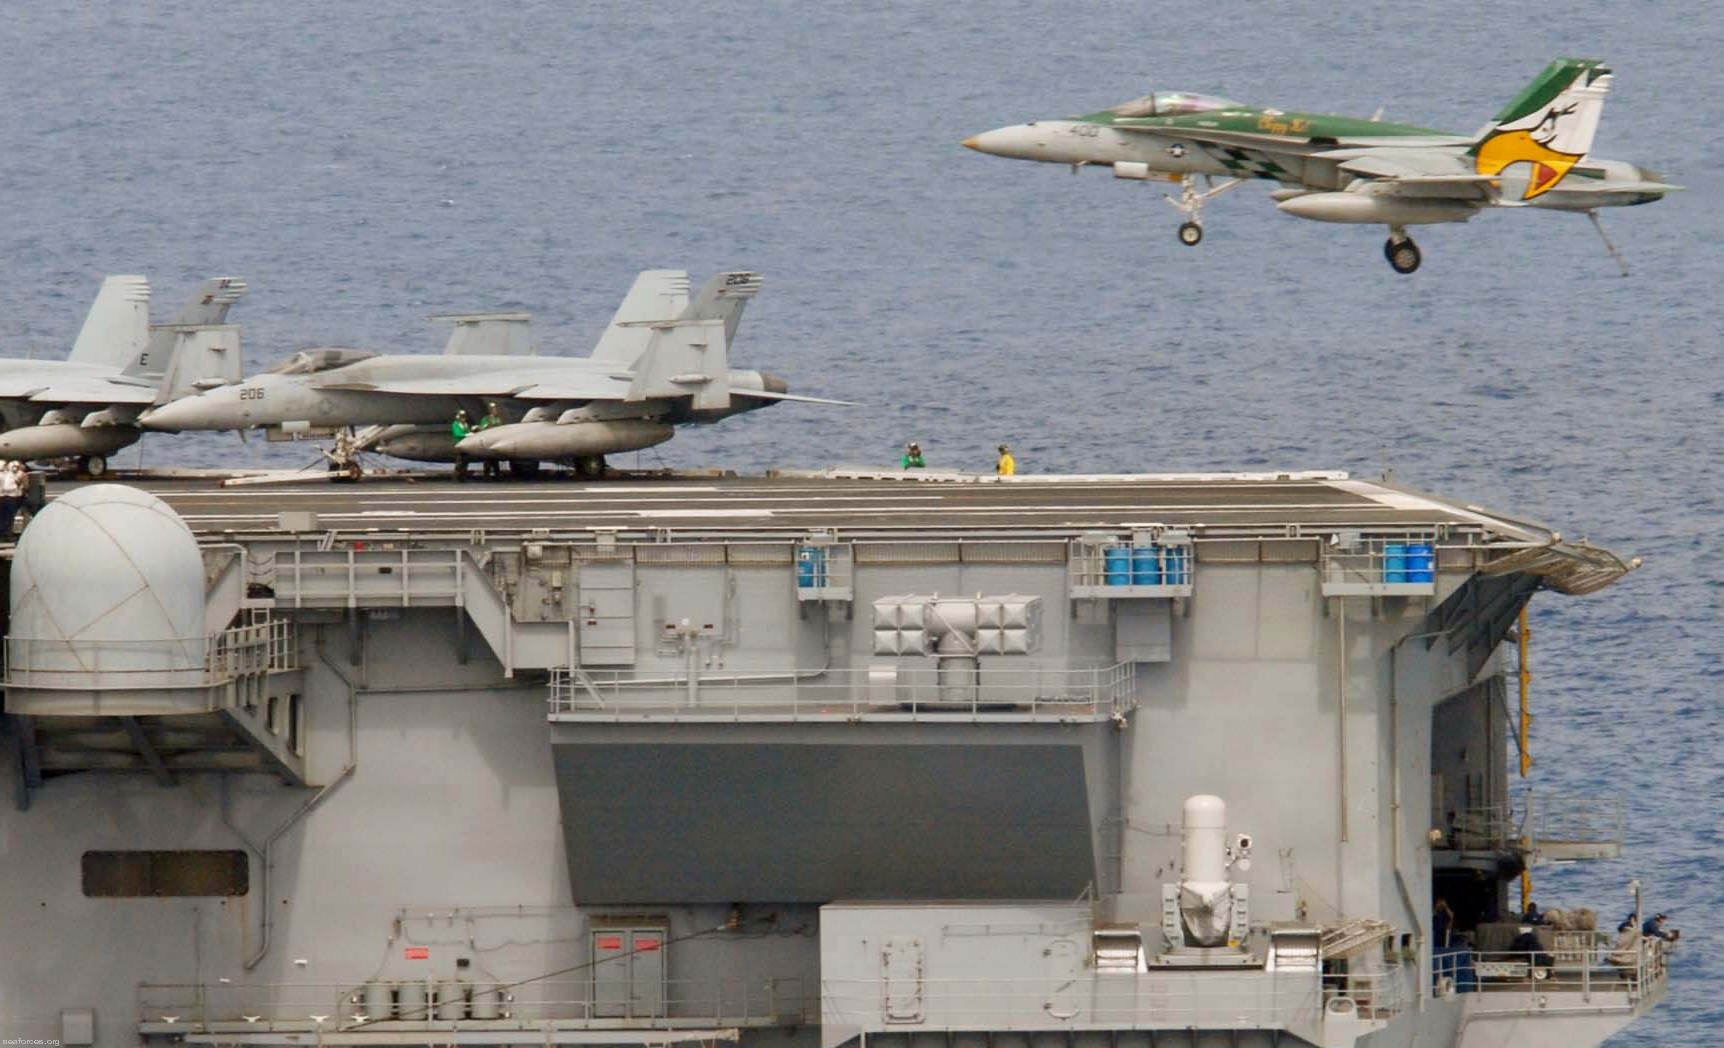 vfa-195 dambusters strike fighter squadron navy f/a-18c hornet carrier air wing cvw-5 uss george washington cvn-73 52